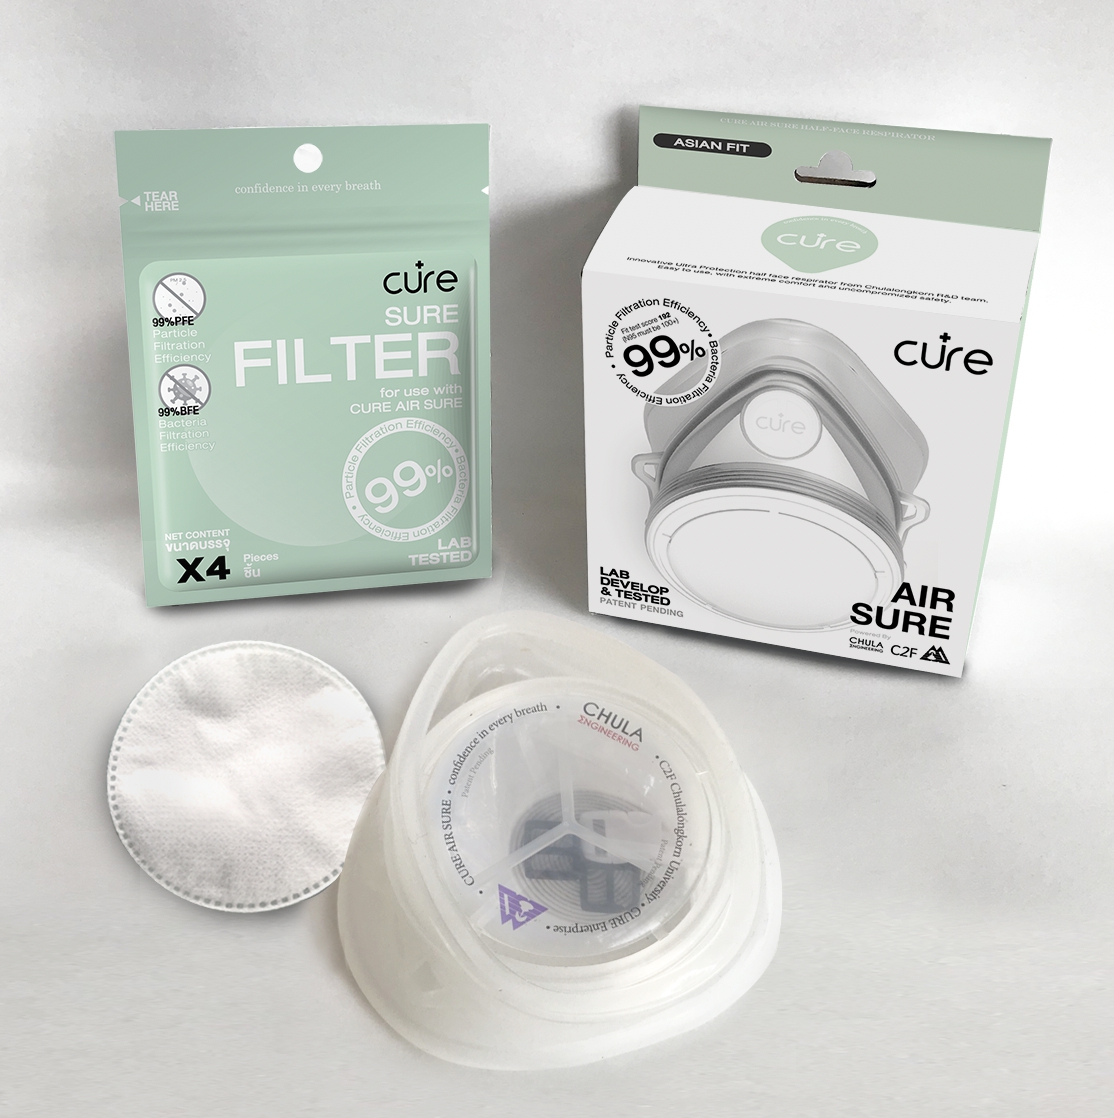 CUre AIR SURE respirator